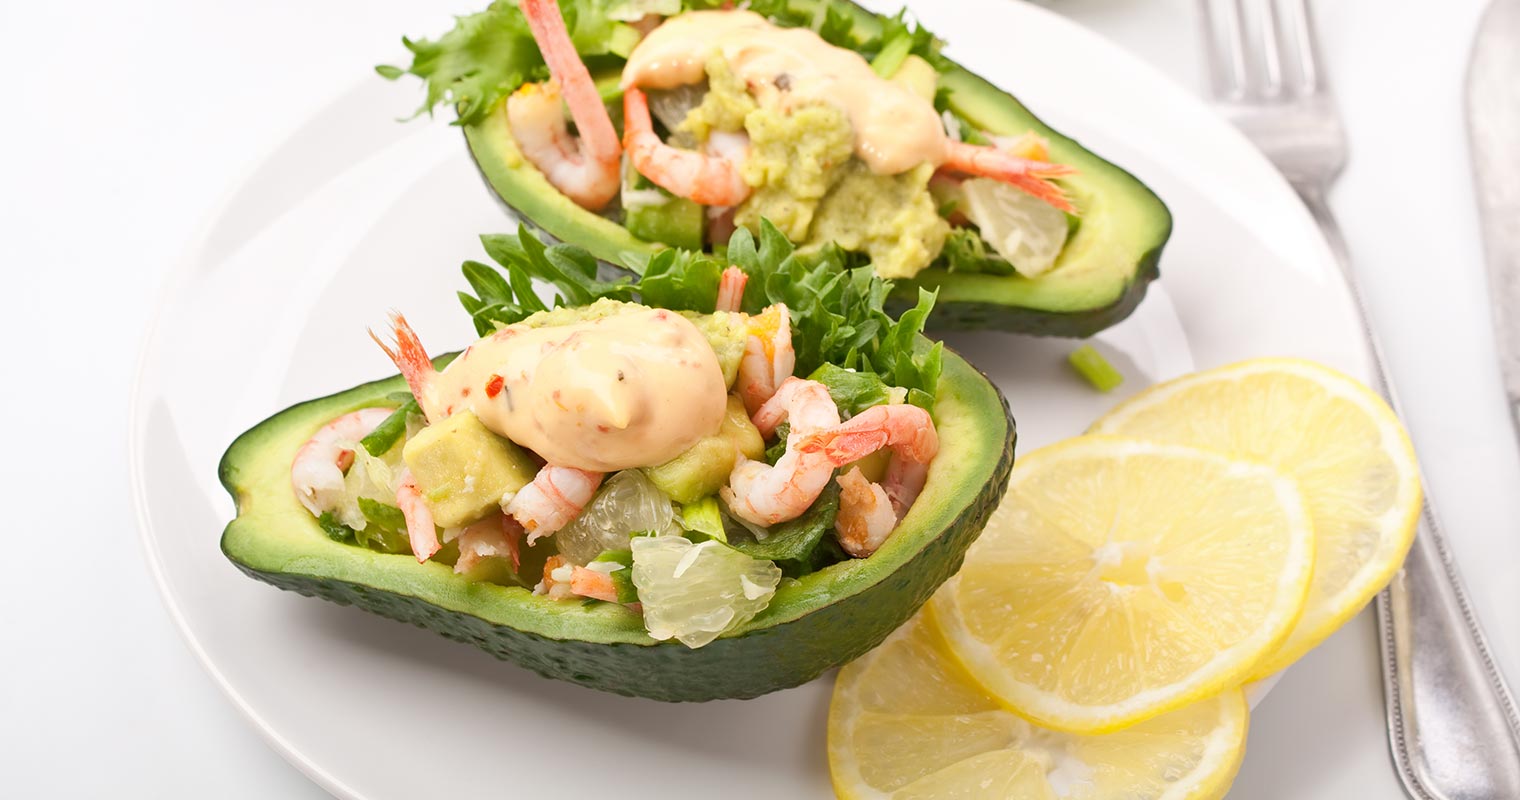 avocados and shrimps are good sources of dietary vitamin E for antioxidant effect and smoother skin